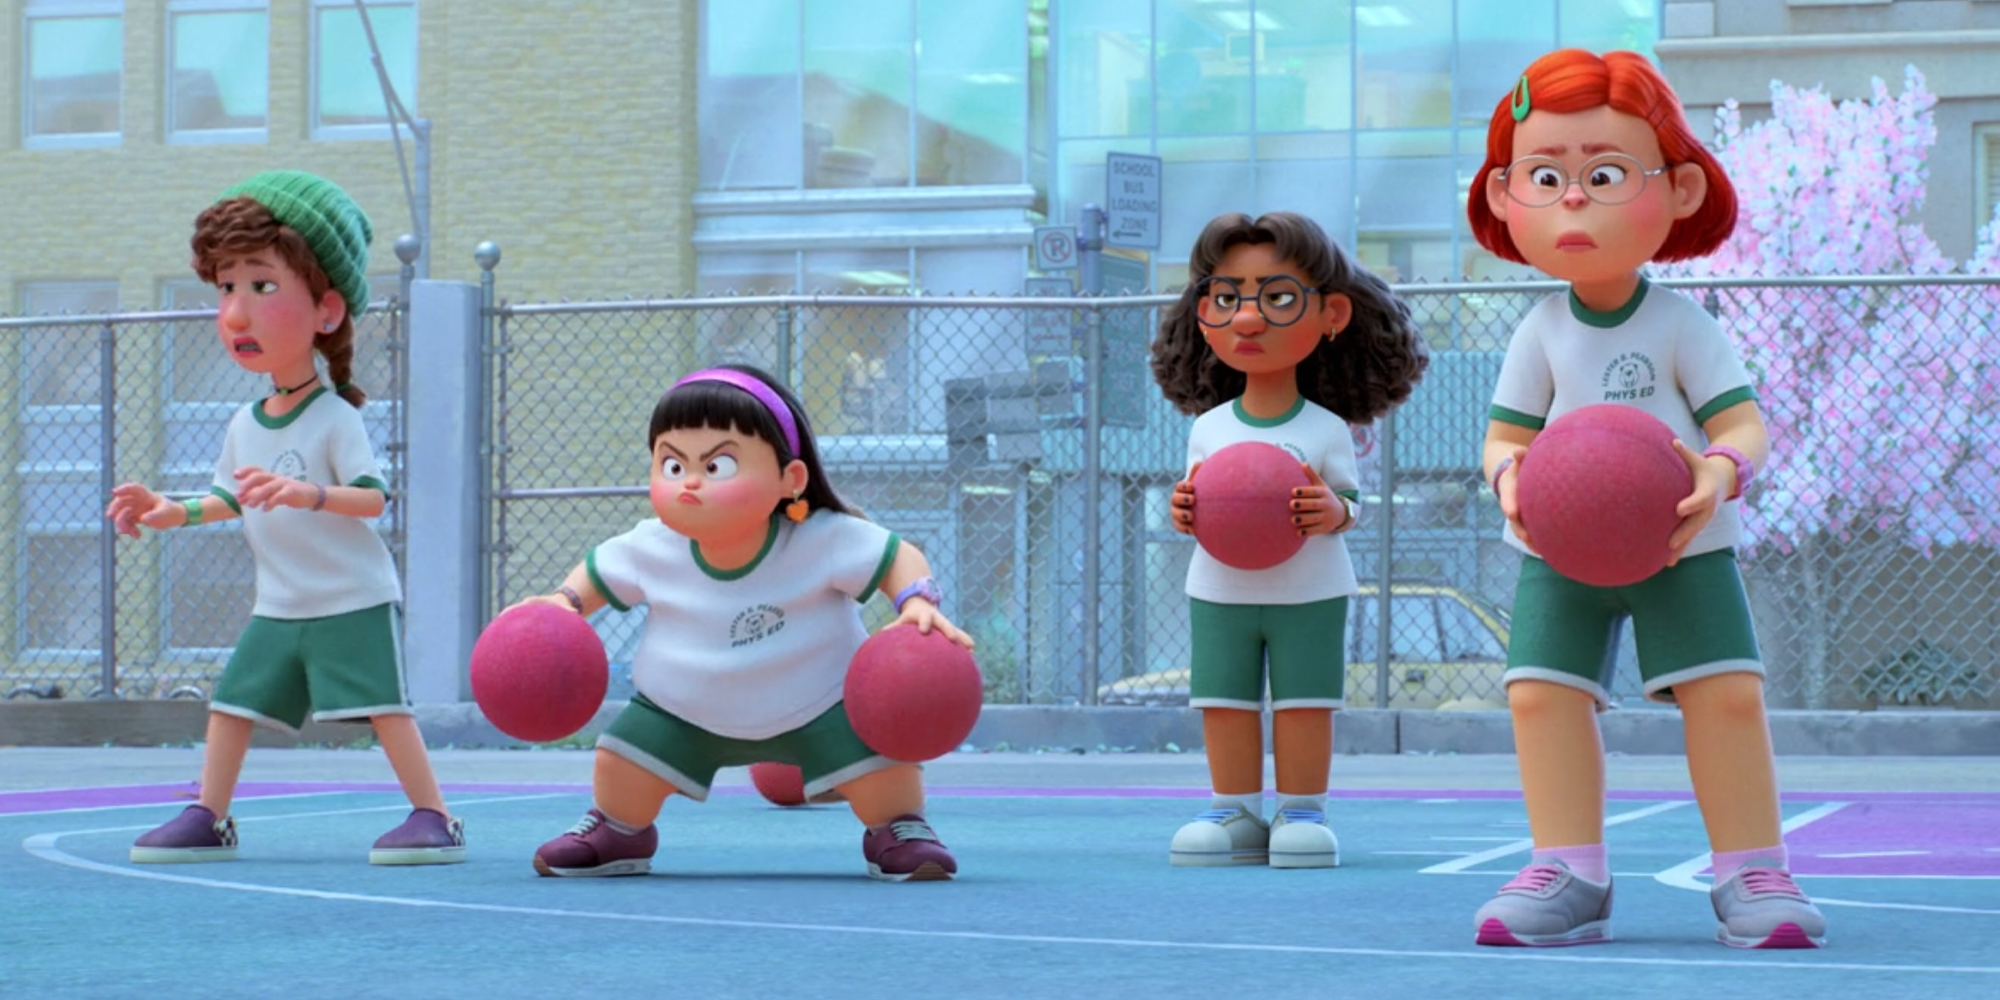 The four friends playing dodge ball in Turning Red.